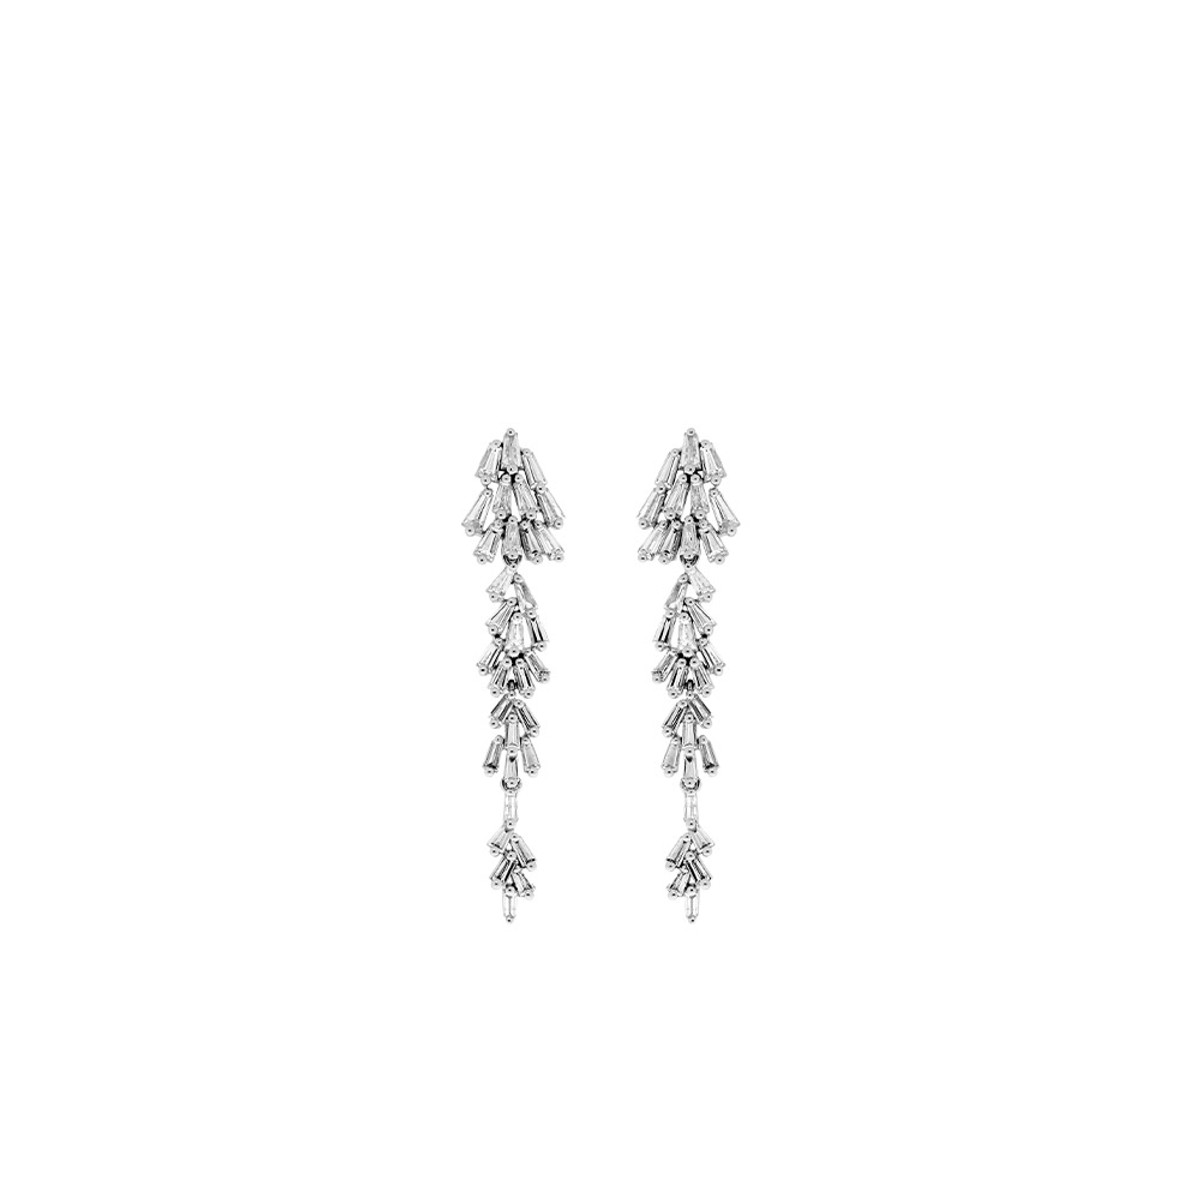 Hyde Park Collection 18K White Gold Diamond Earrings-43694 Product Image